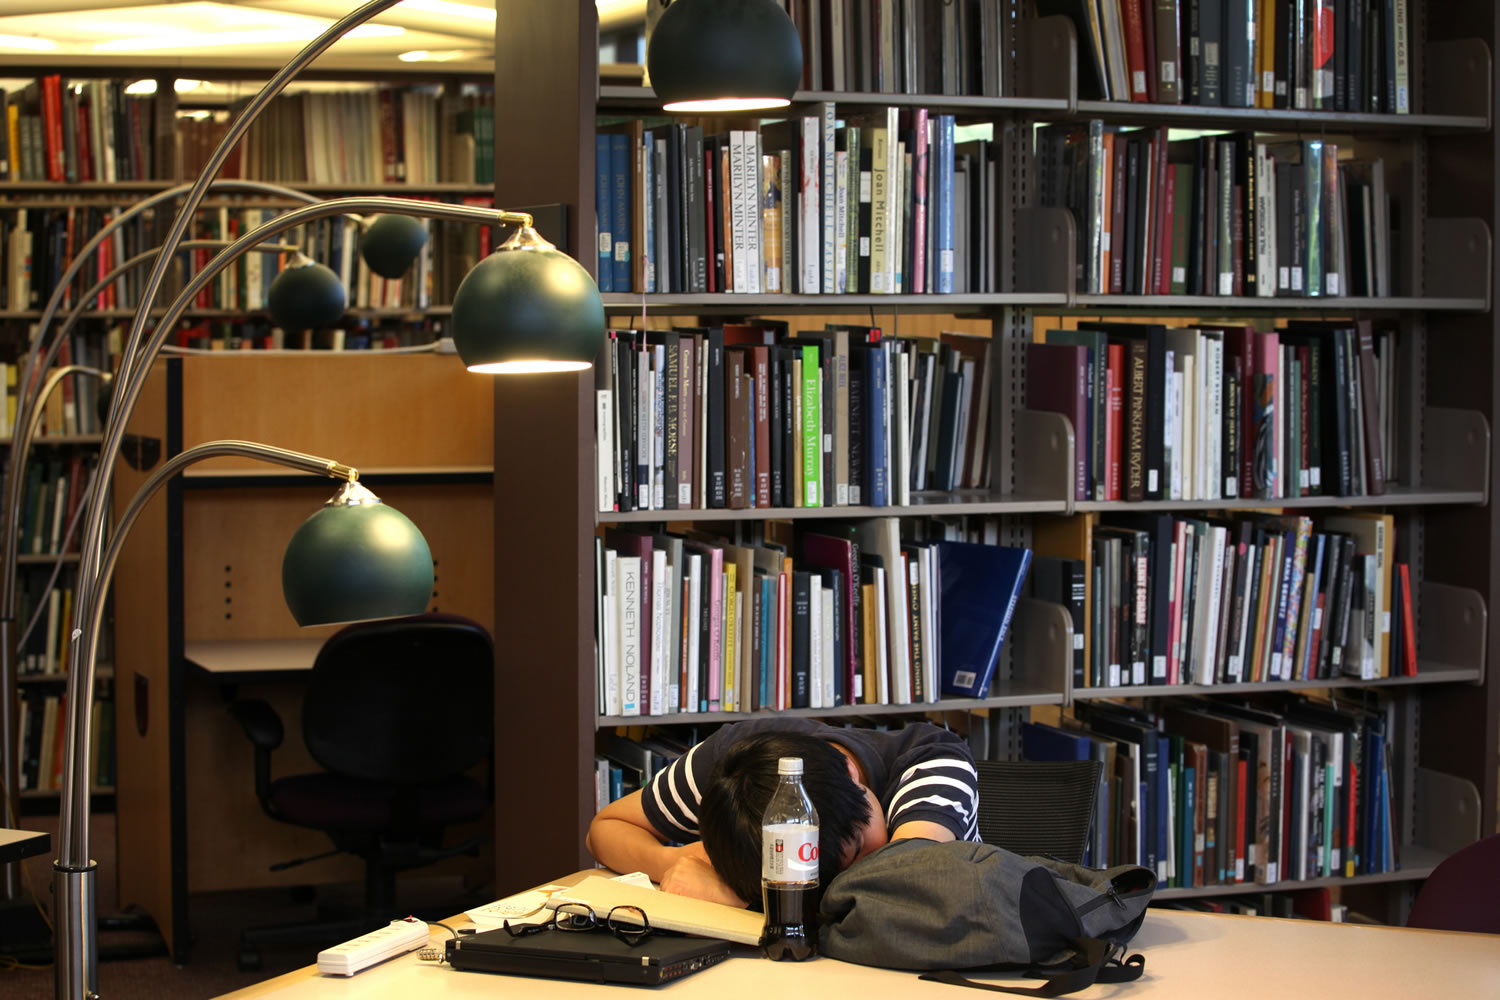 Taewon Kim, an electrical engineering systems graduate student, sleeps in the library at the Duderstandt Center on the campus of the University of Michigan, in Ann Arbor, Mich., in July.